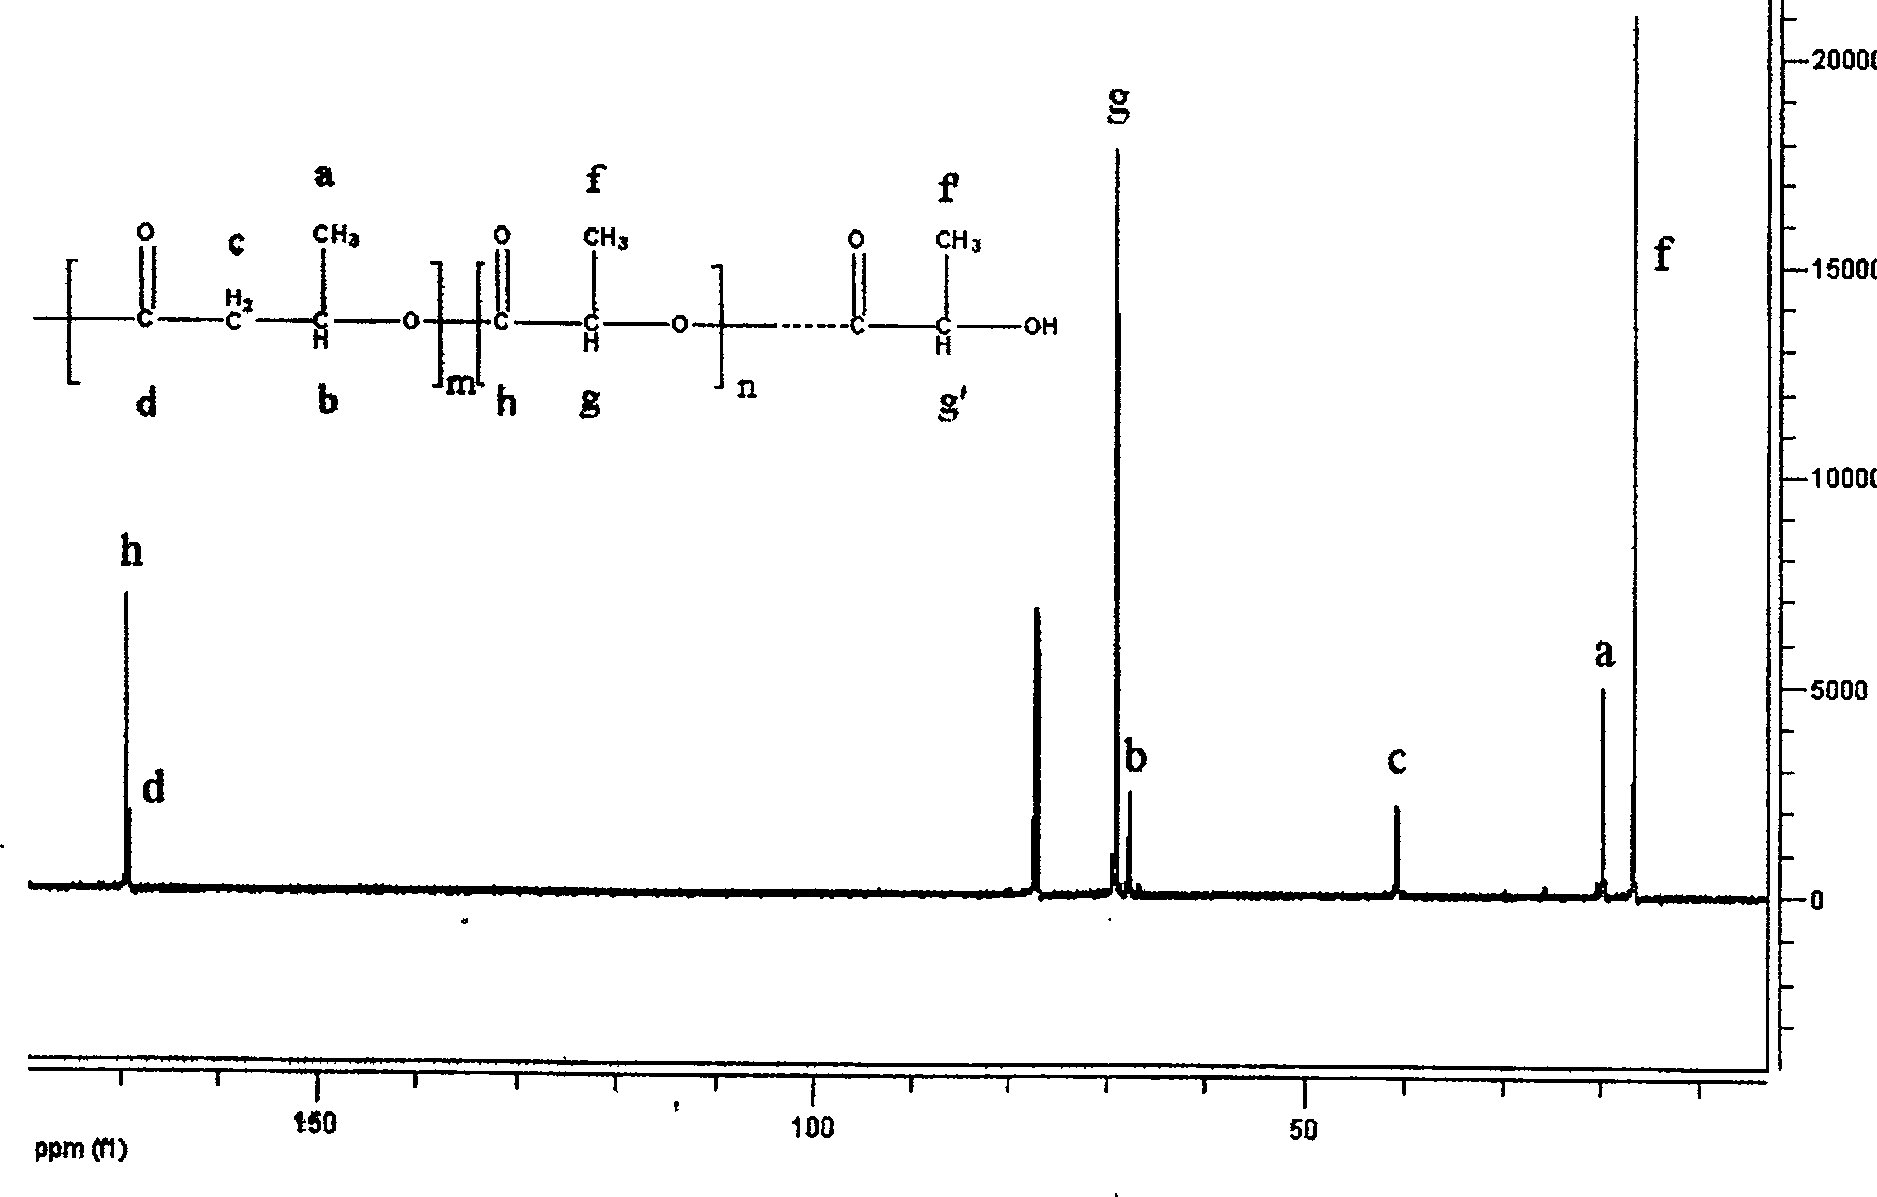 Chemical synthesizing process of beta-butyrolactone with lactide copolymer